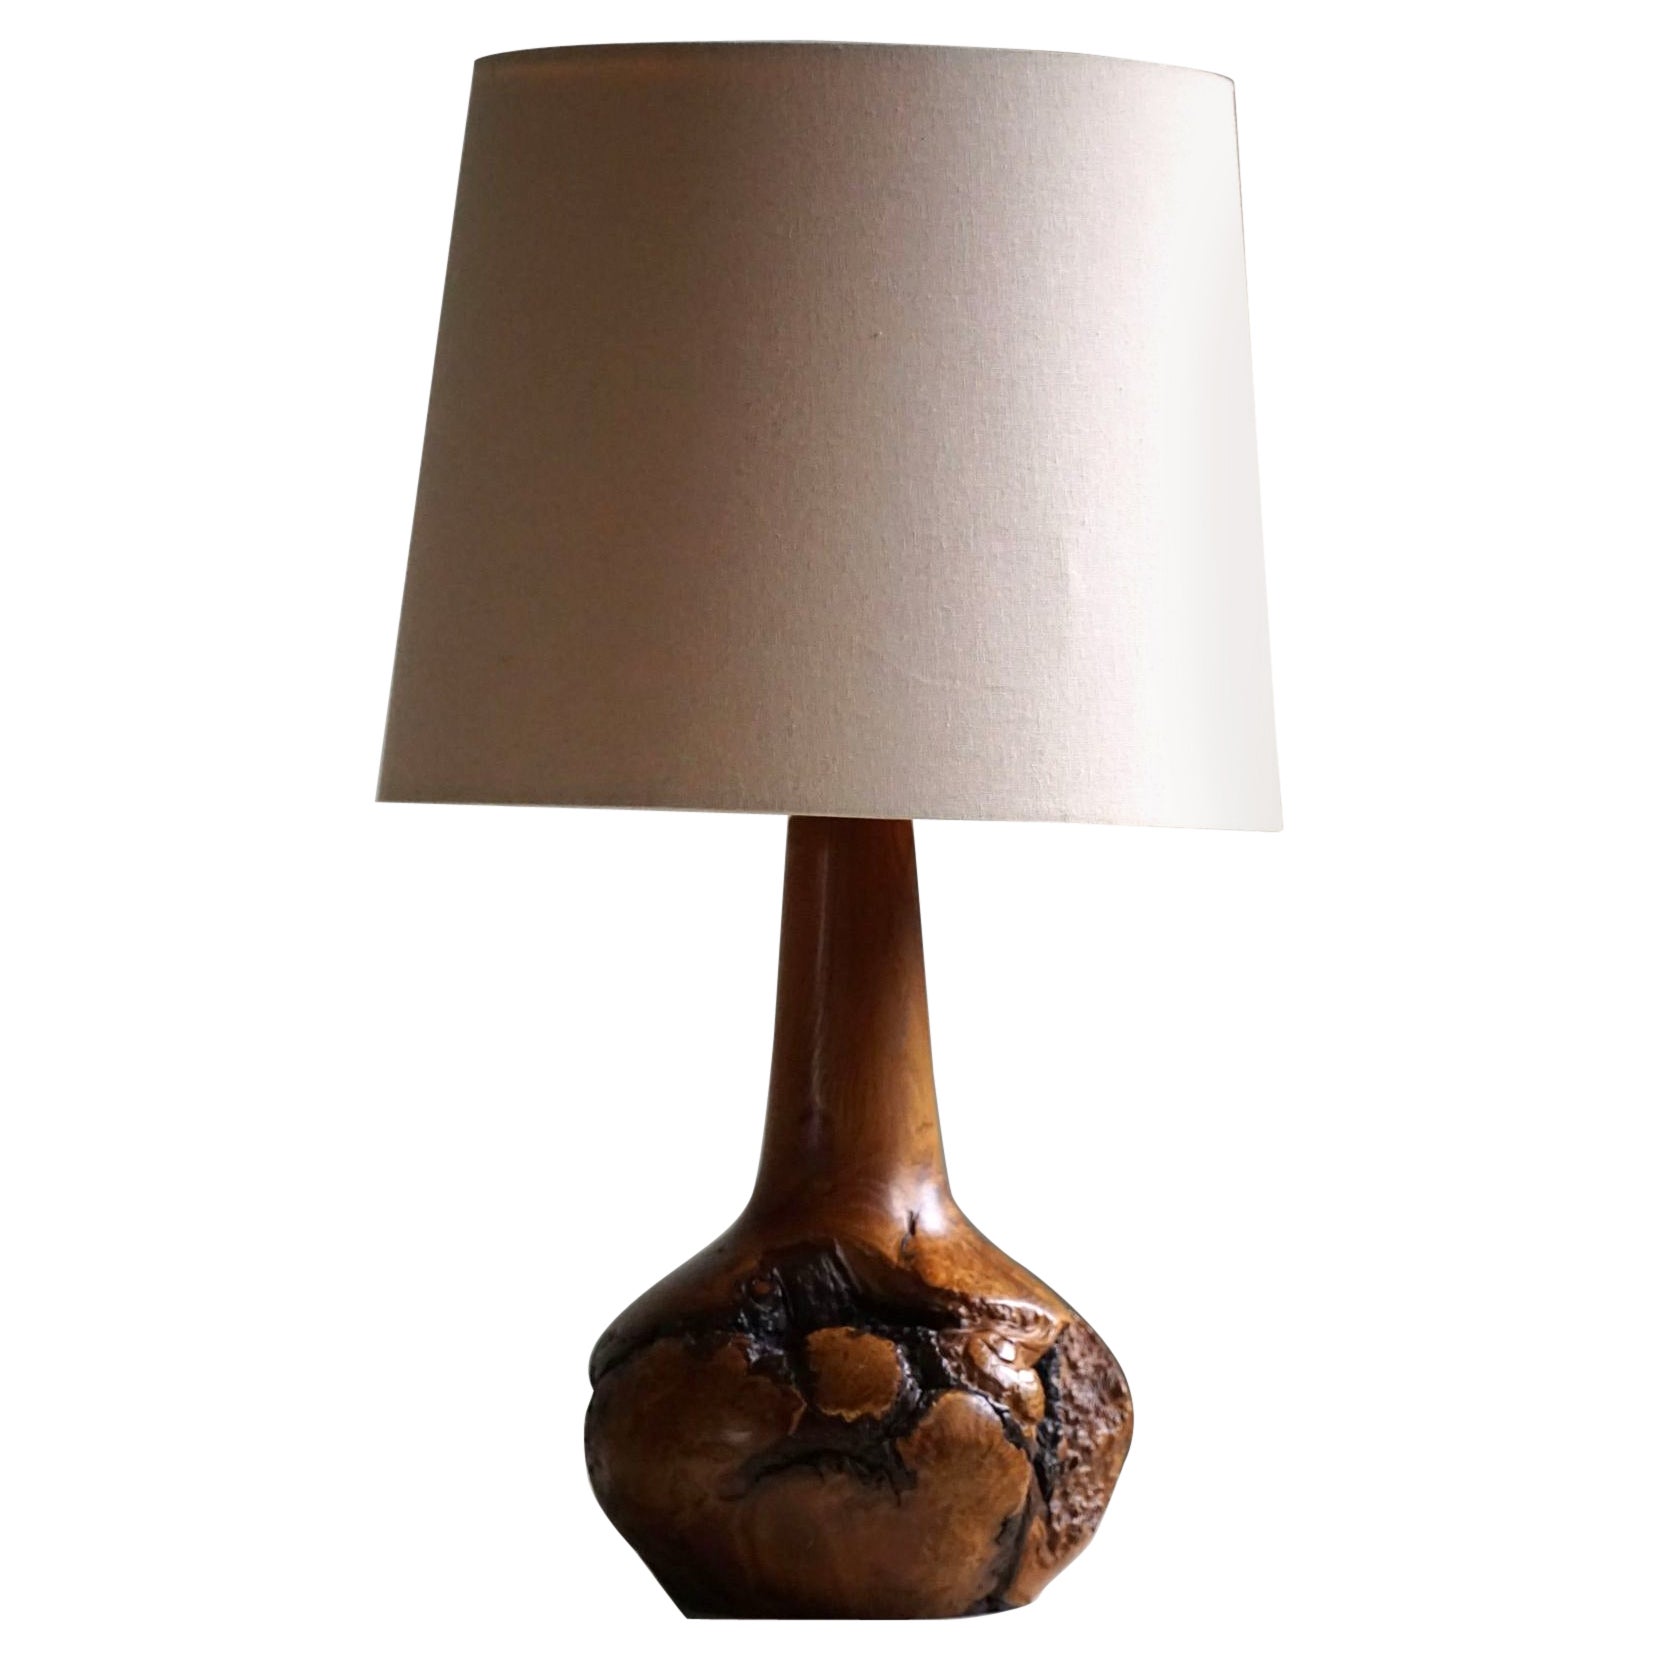 Mid Century Scandinavian Modern Organic Table Lamp in Solid Birch Root, 1960s For Sale